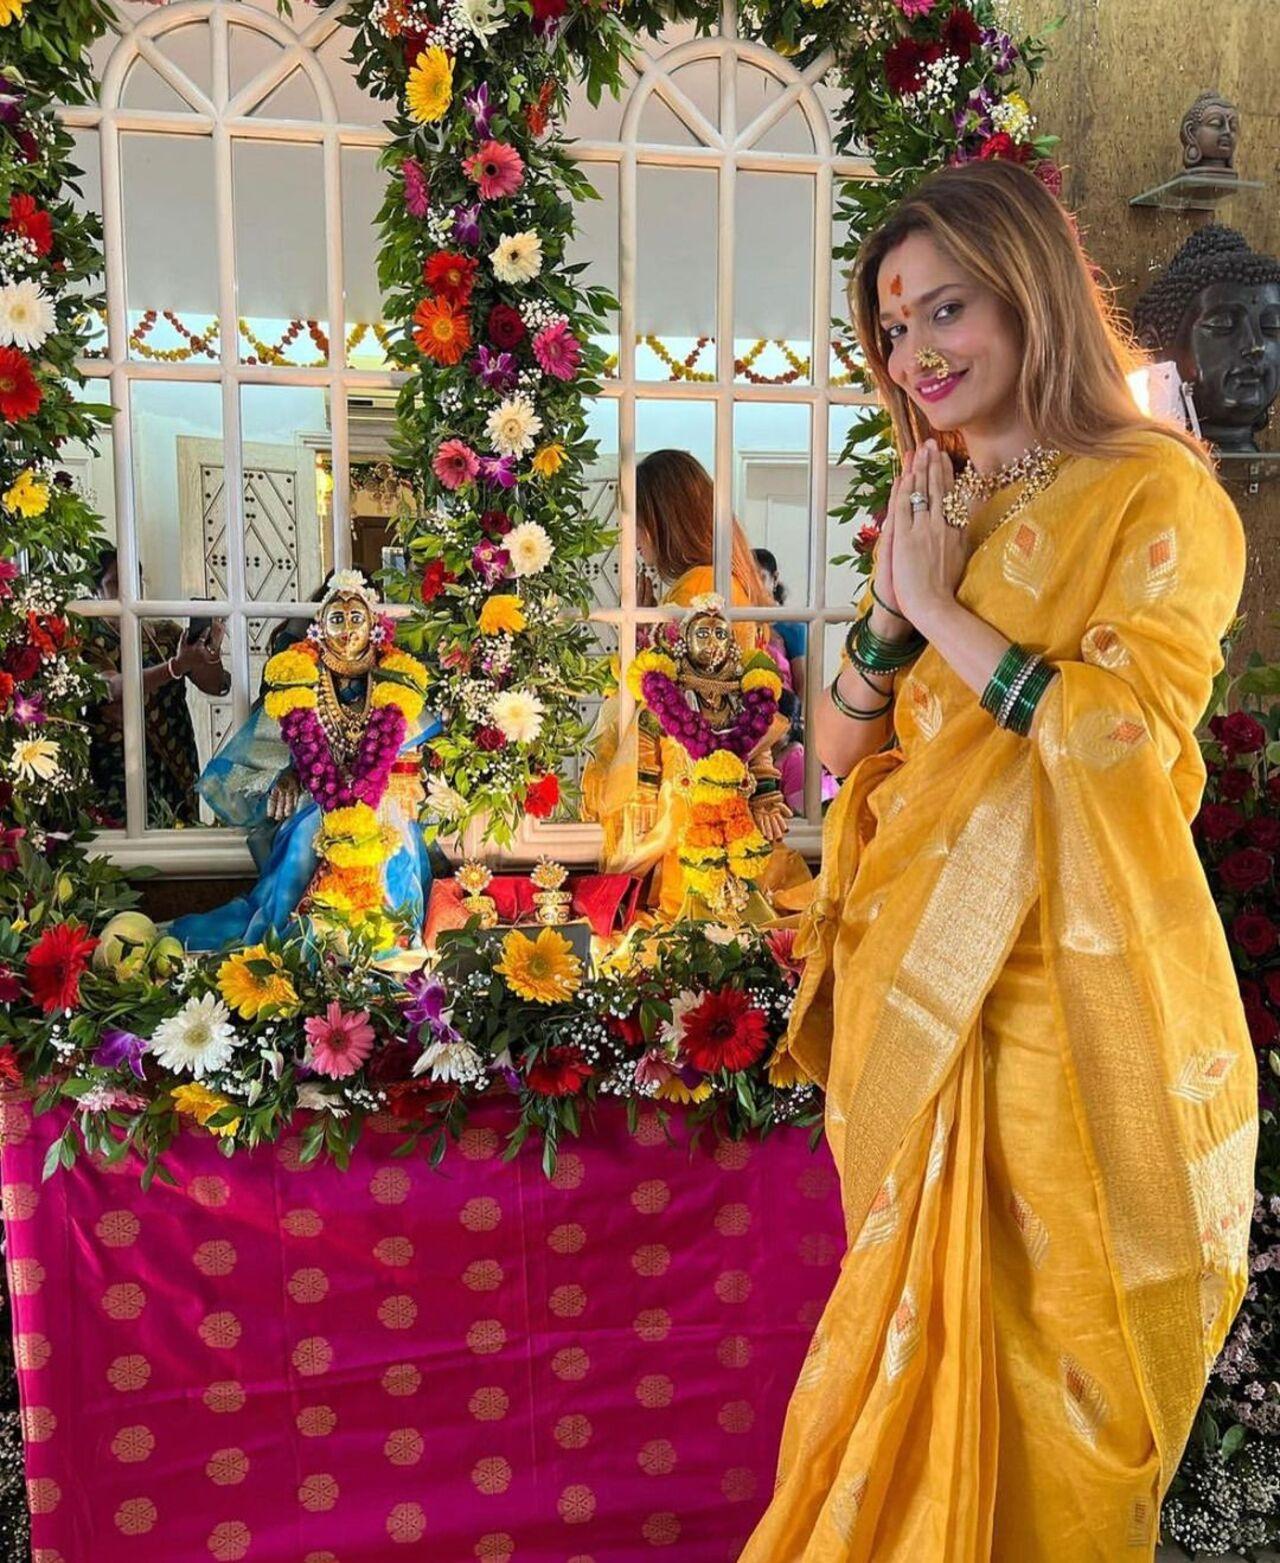 Ankita Lokhande continued the tradition of celebrating Ganesh Chaturthi at home with her family members